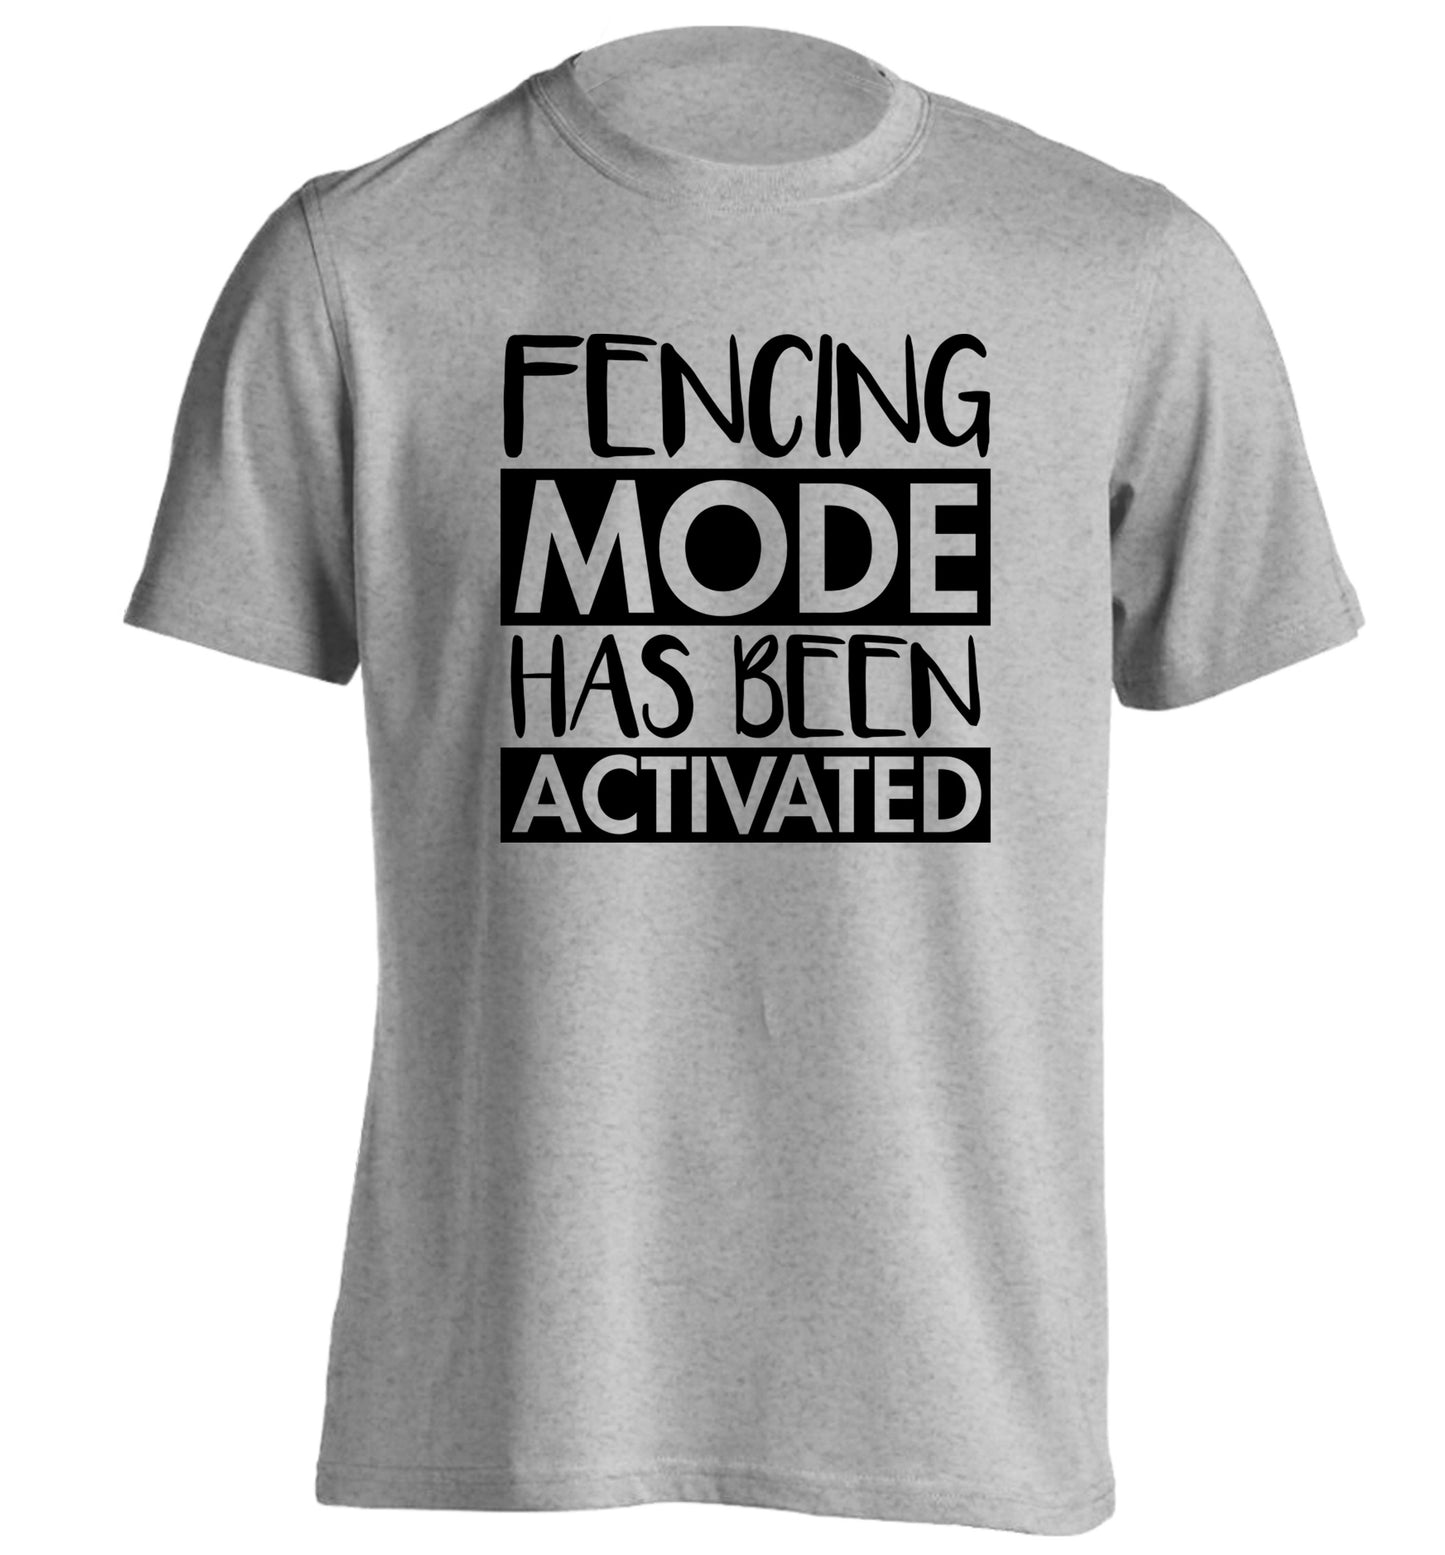 Fencing mode activated adults unisex grey Tshirt 2XL